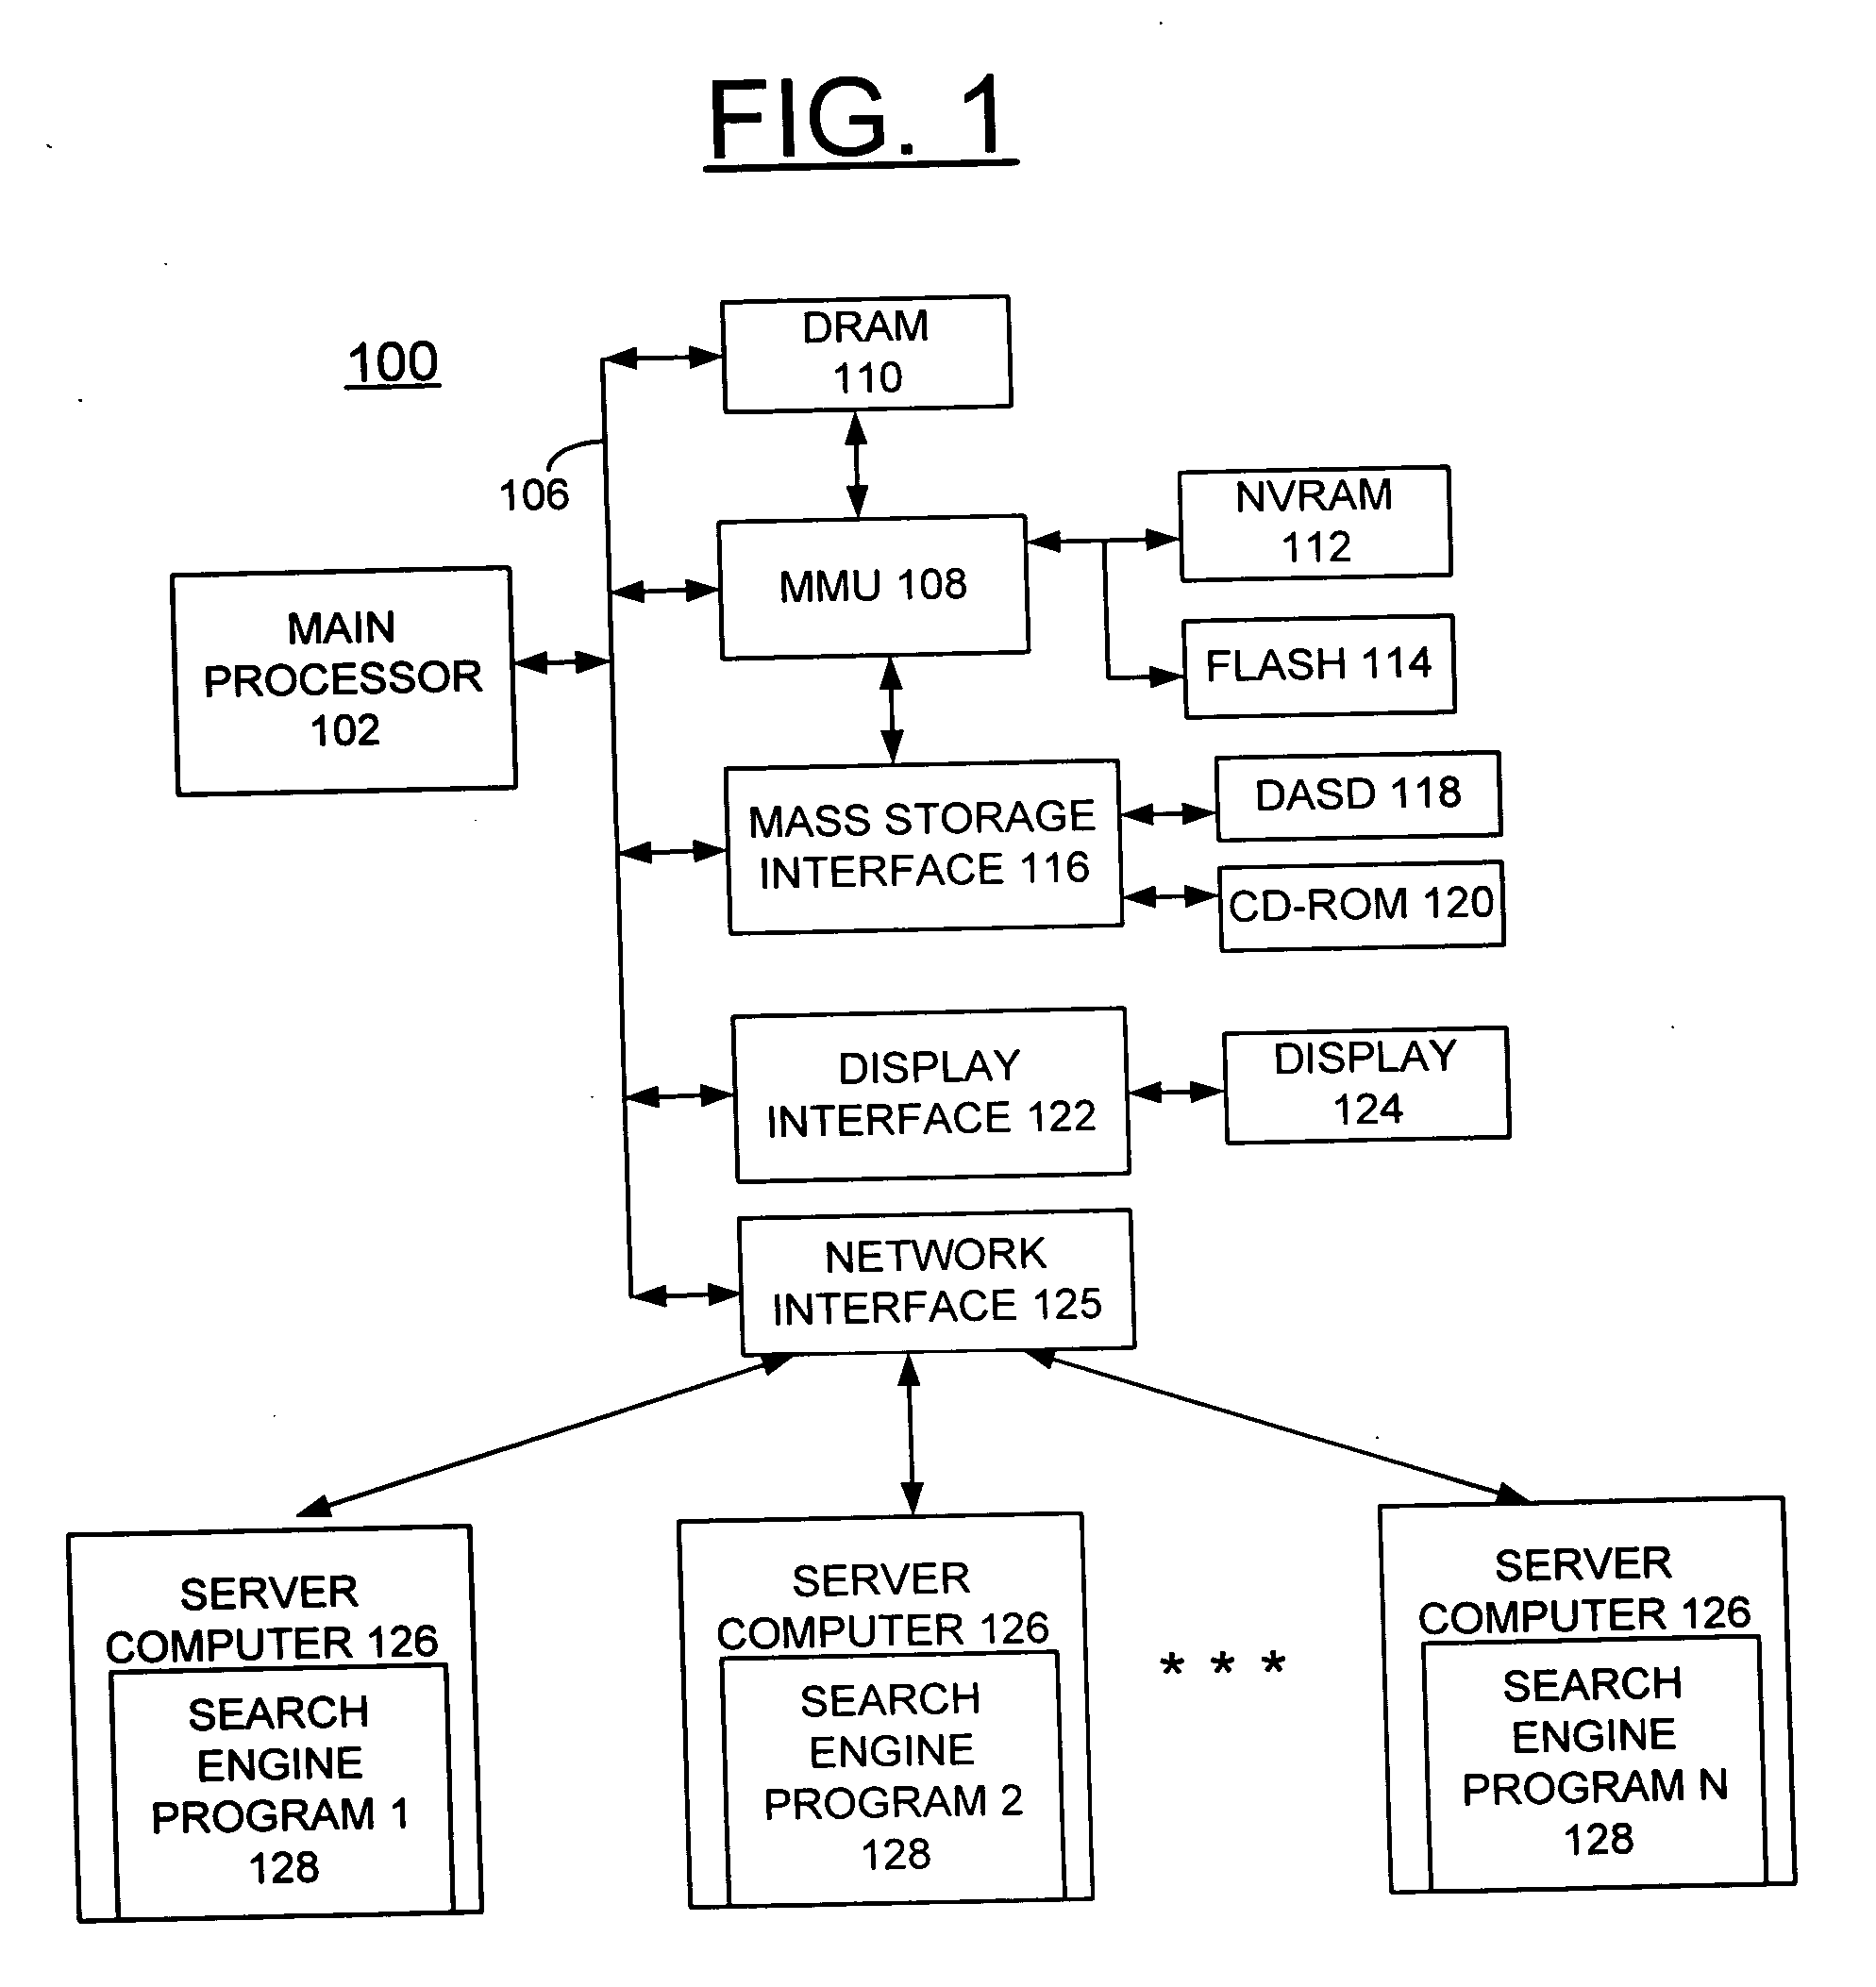 Ring method, apparatus, and computer program product for managing federated search results in a heterogeneous environment